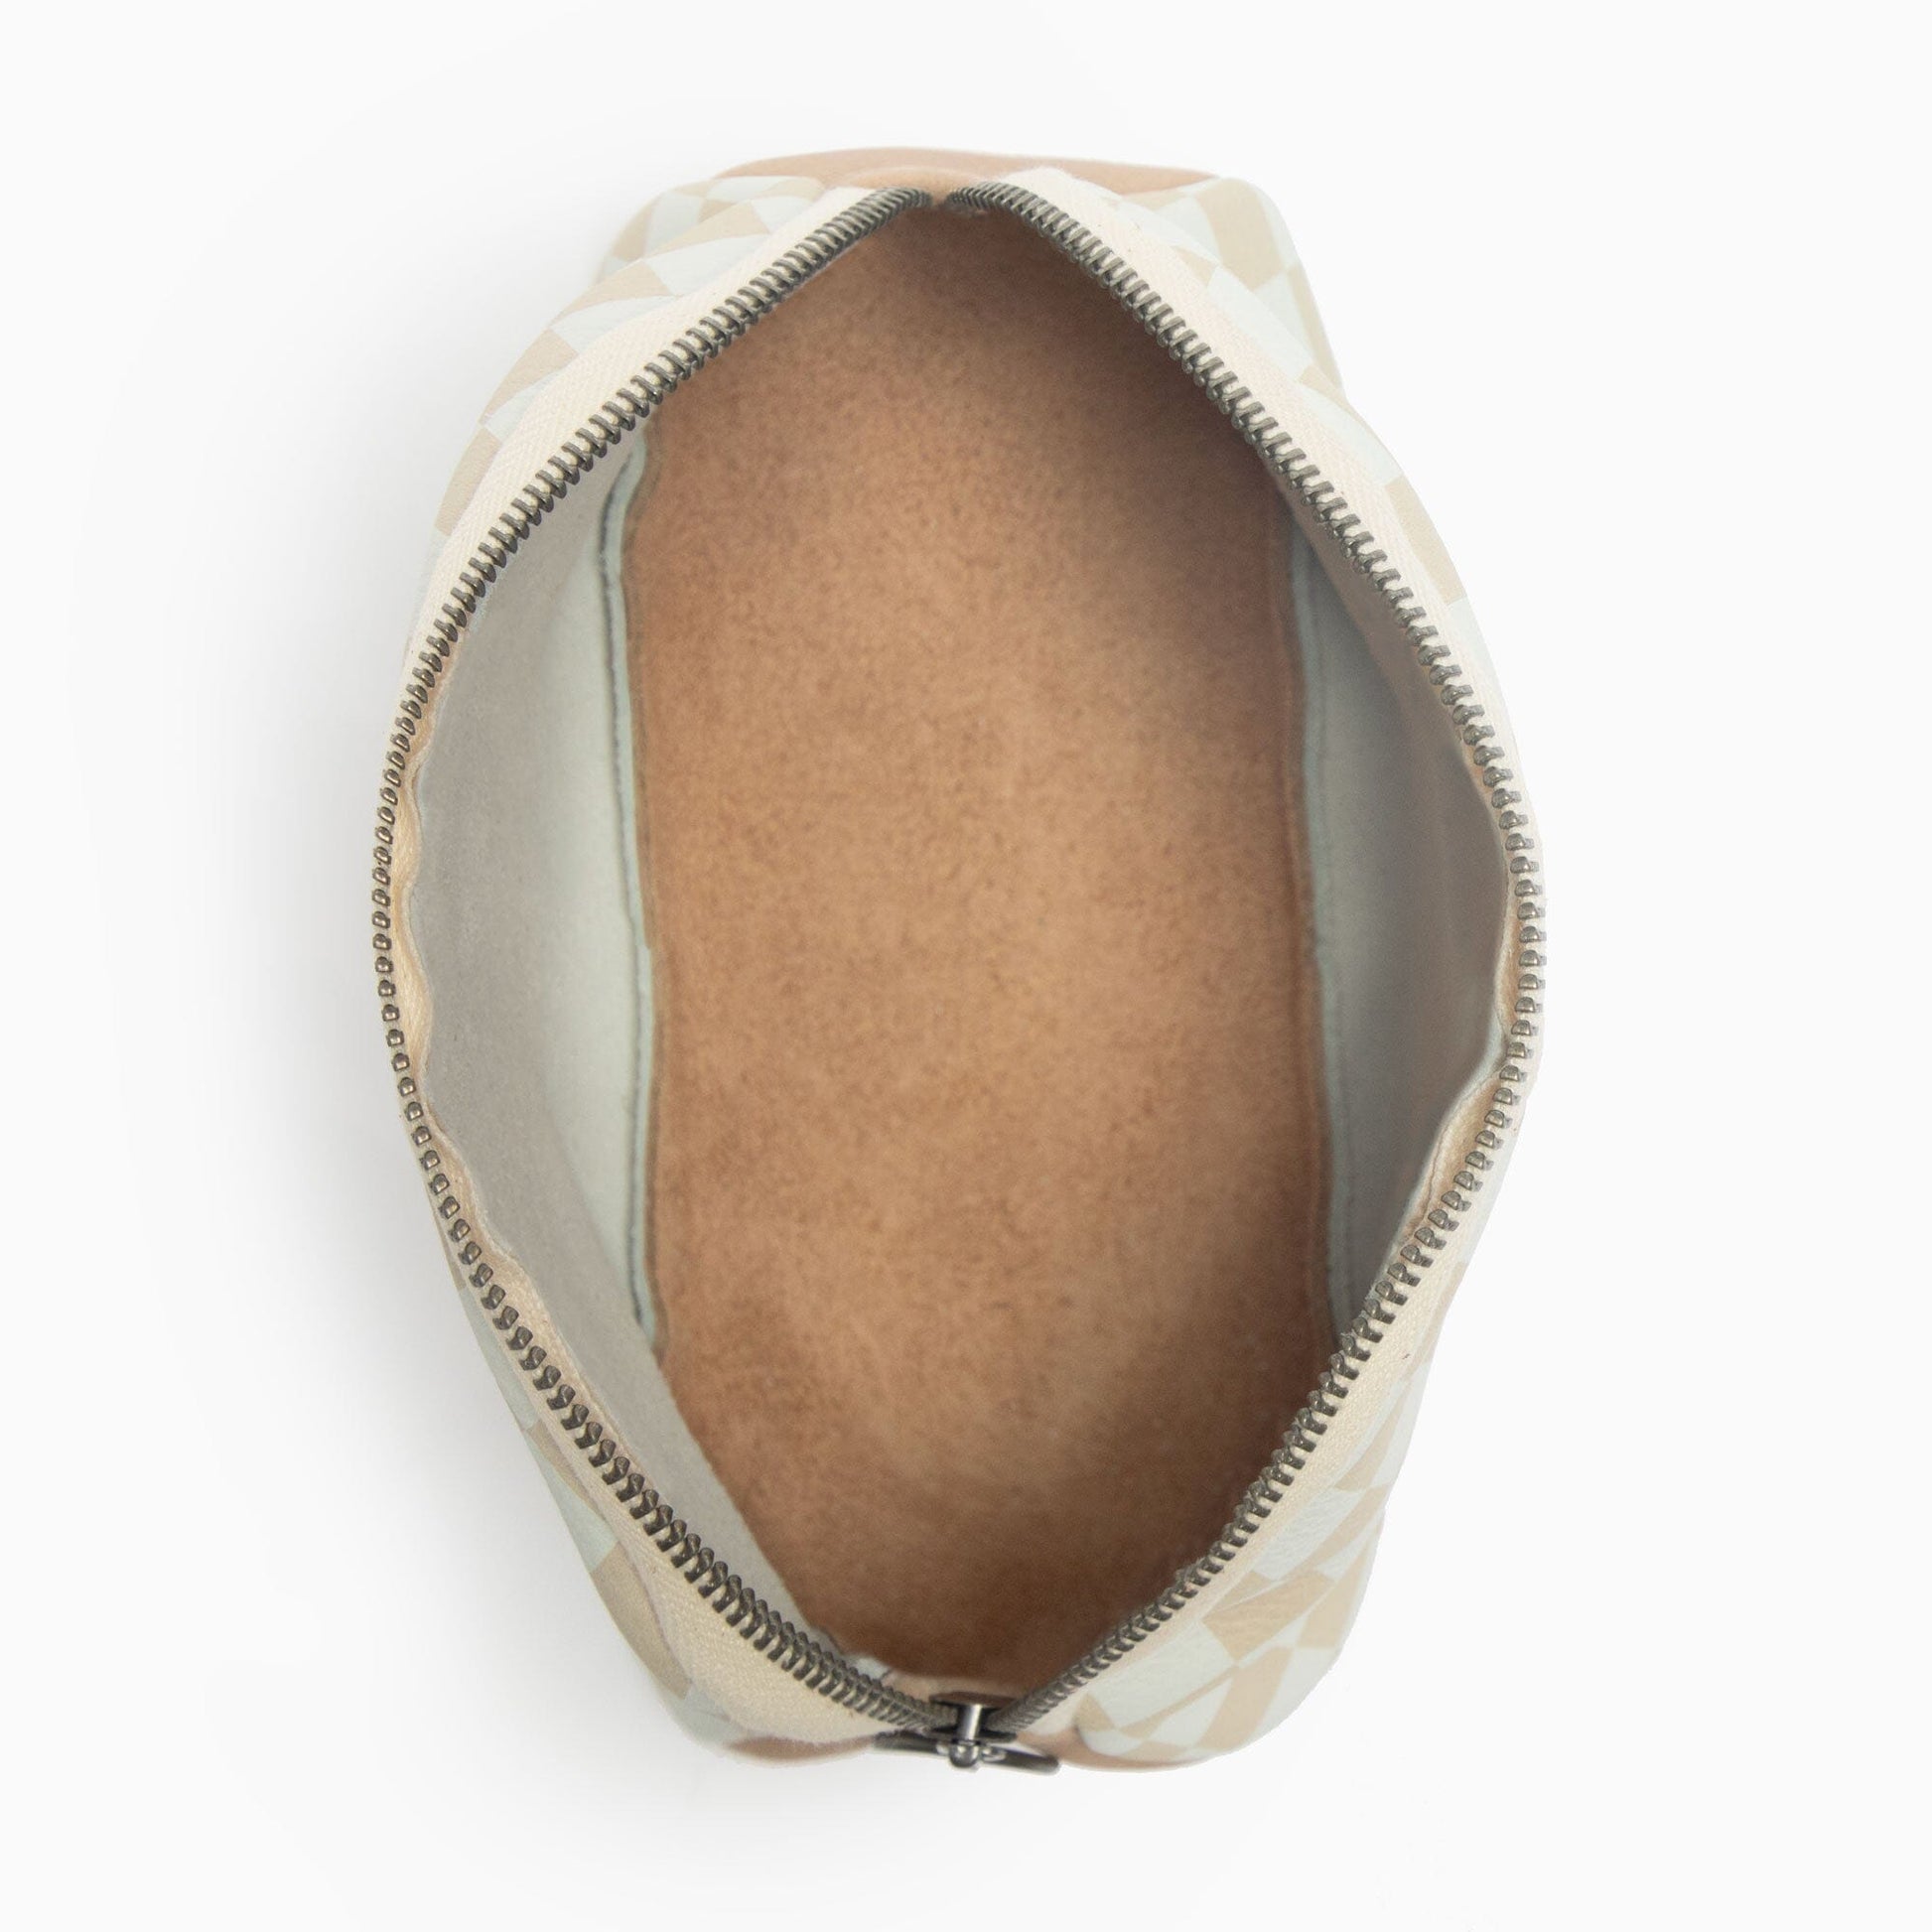 Trendy Tan Check Cosmetic Pouch Cosmetic Pouch In House Bag 